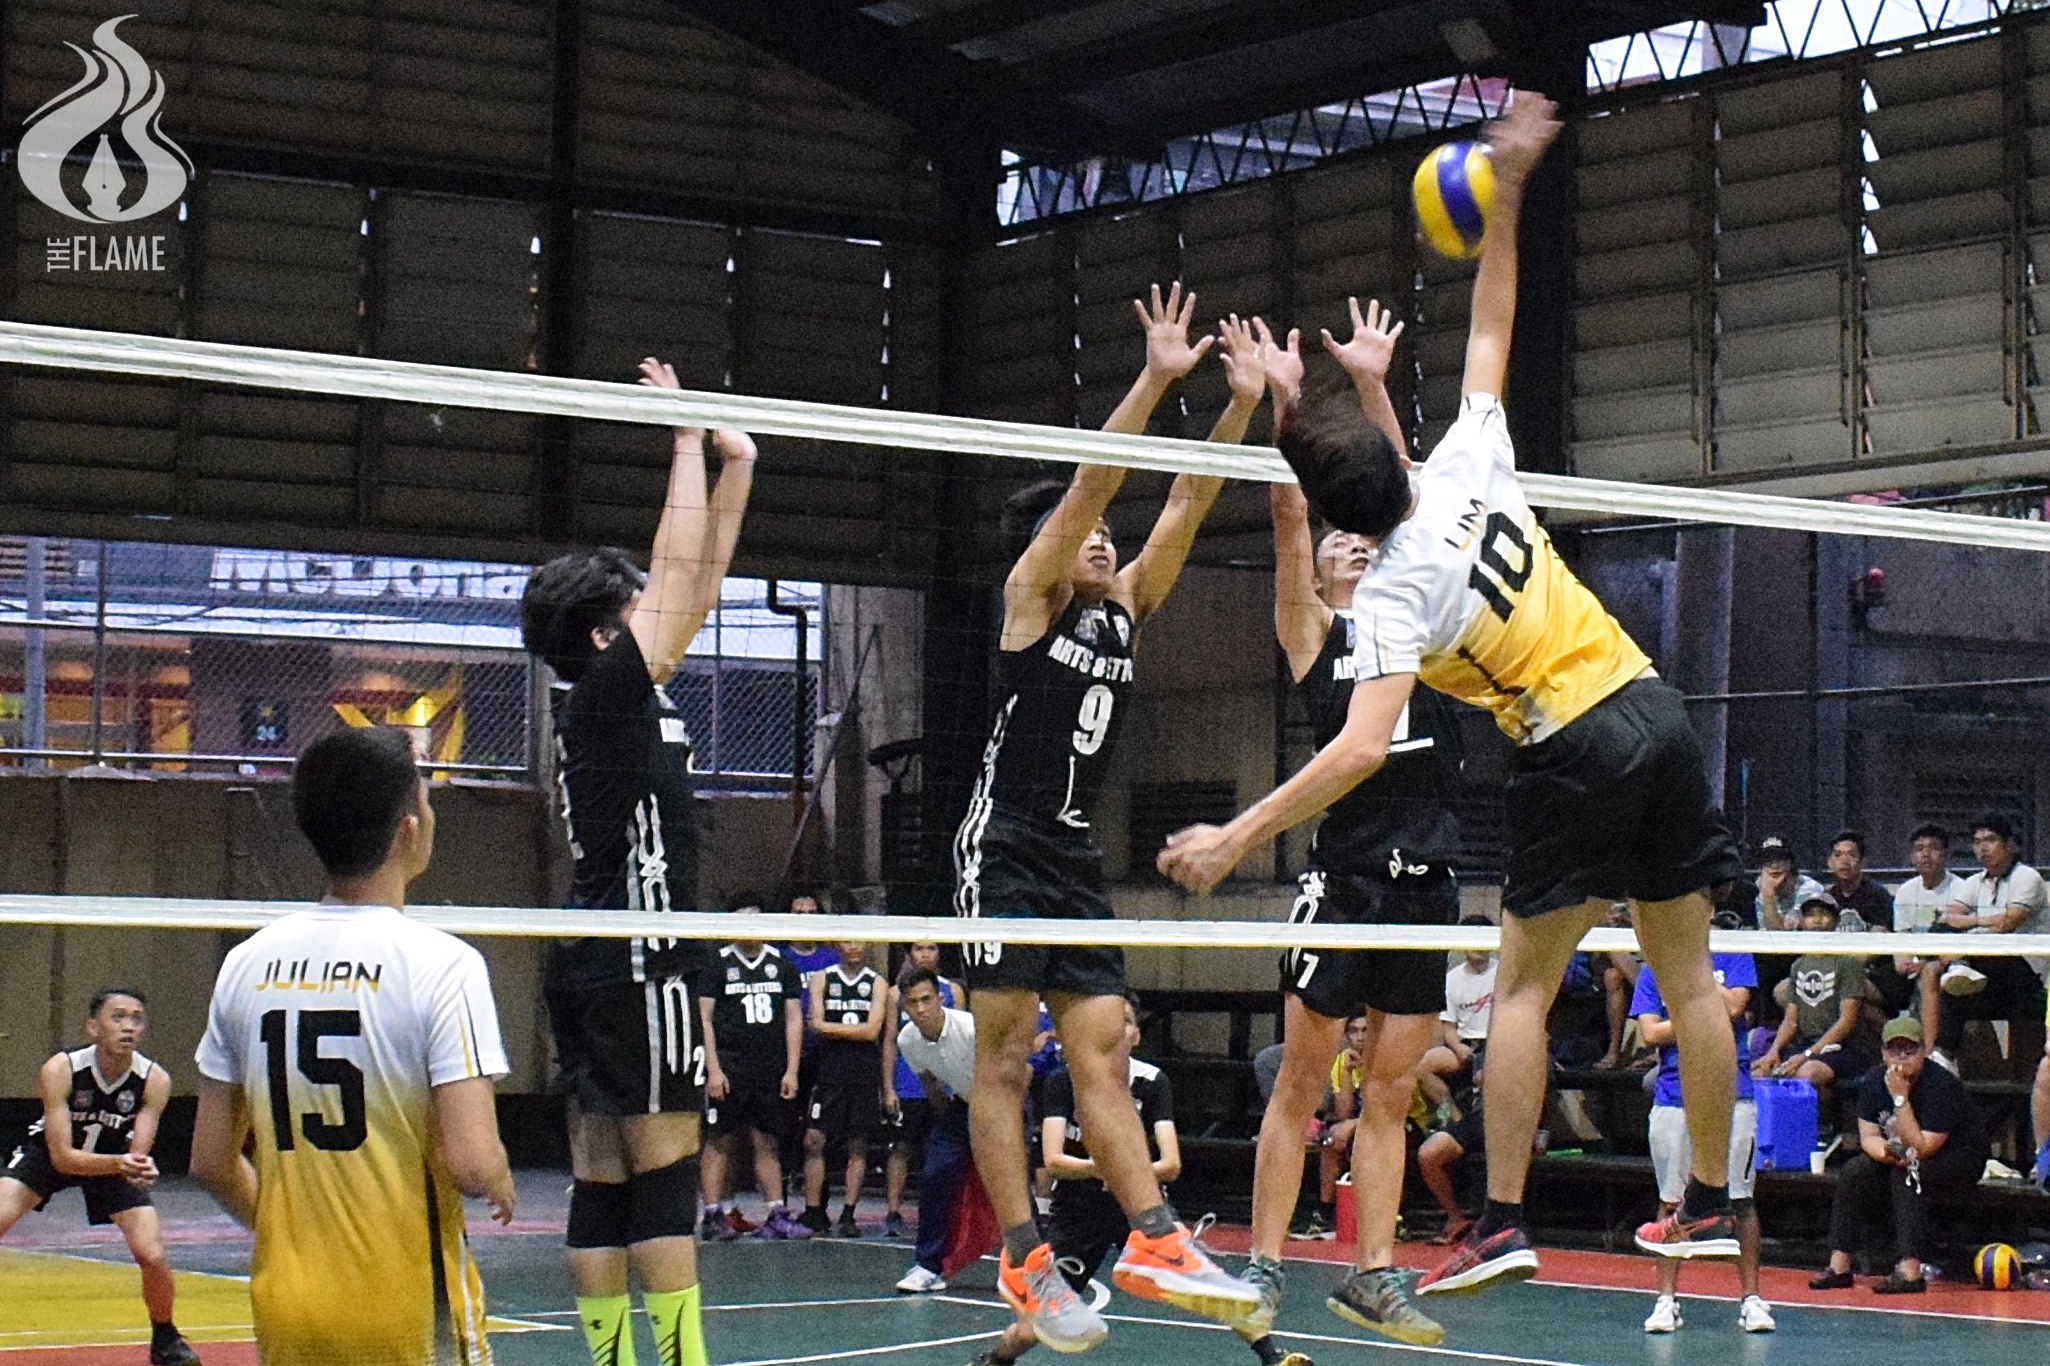 AB Men’s remains undefeated, grabs semis spot